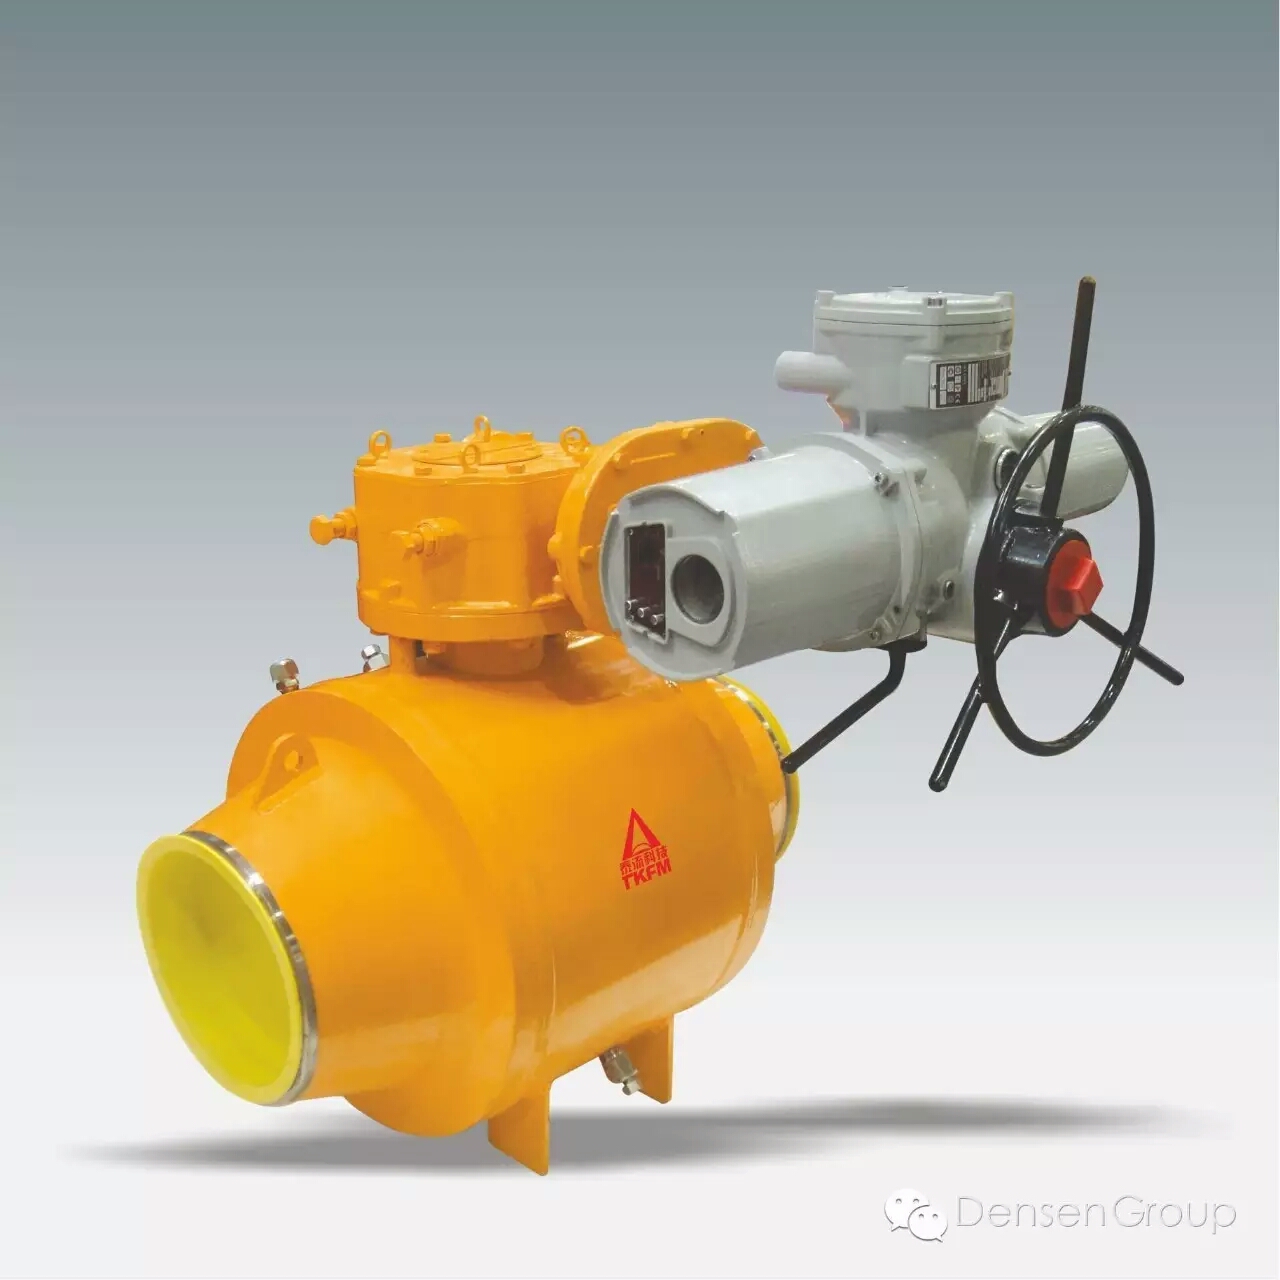 About welded ball valve0